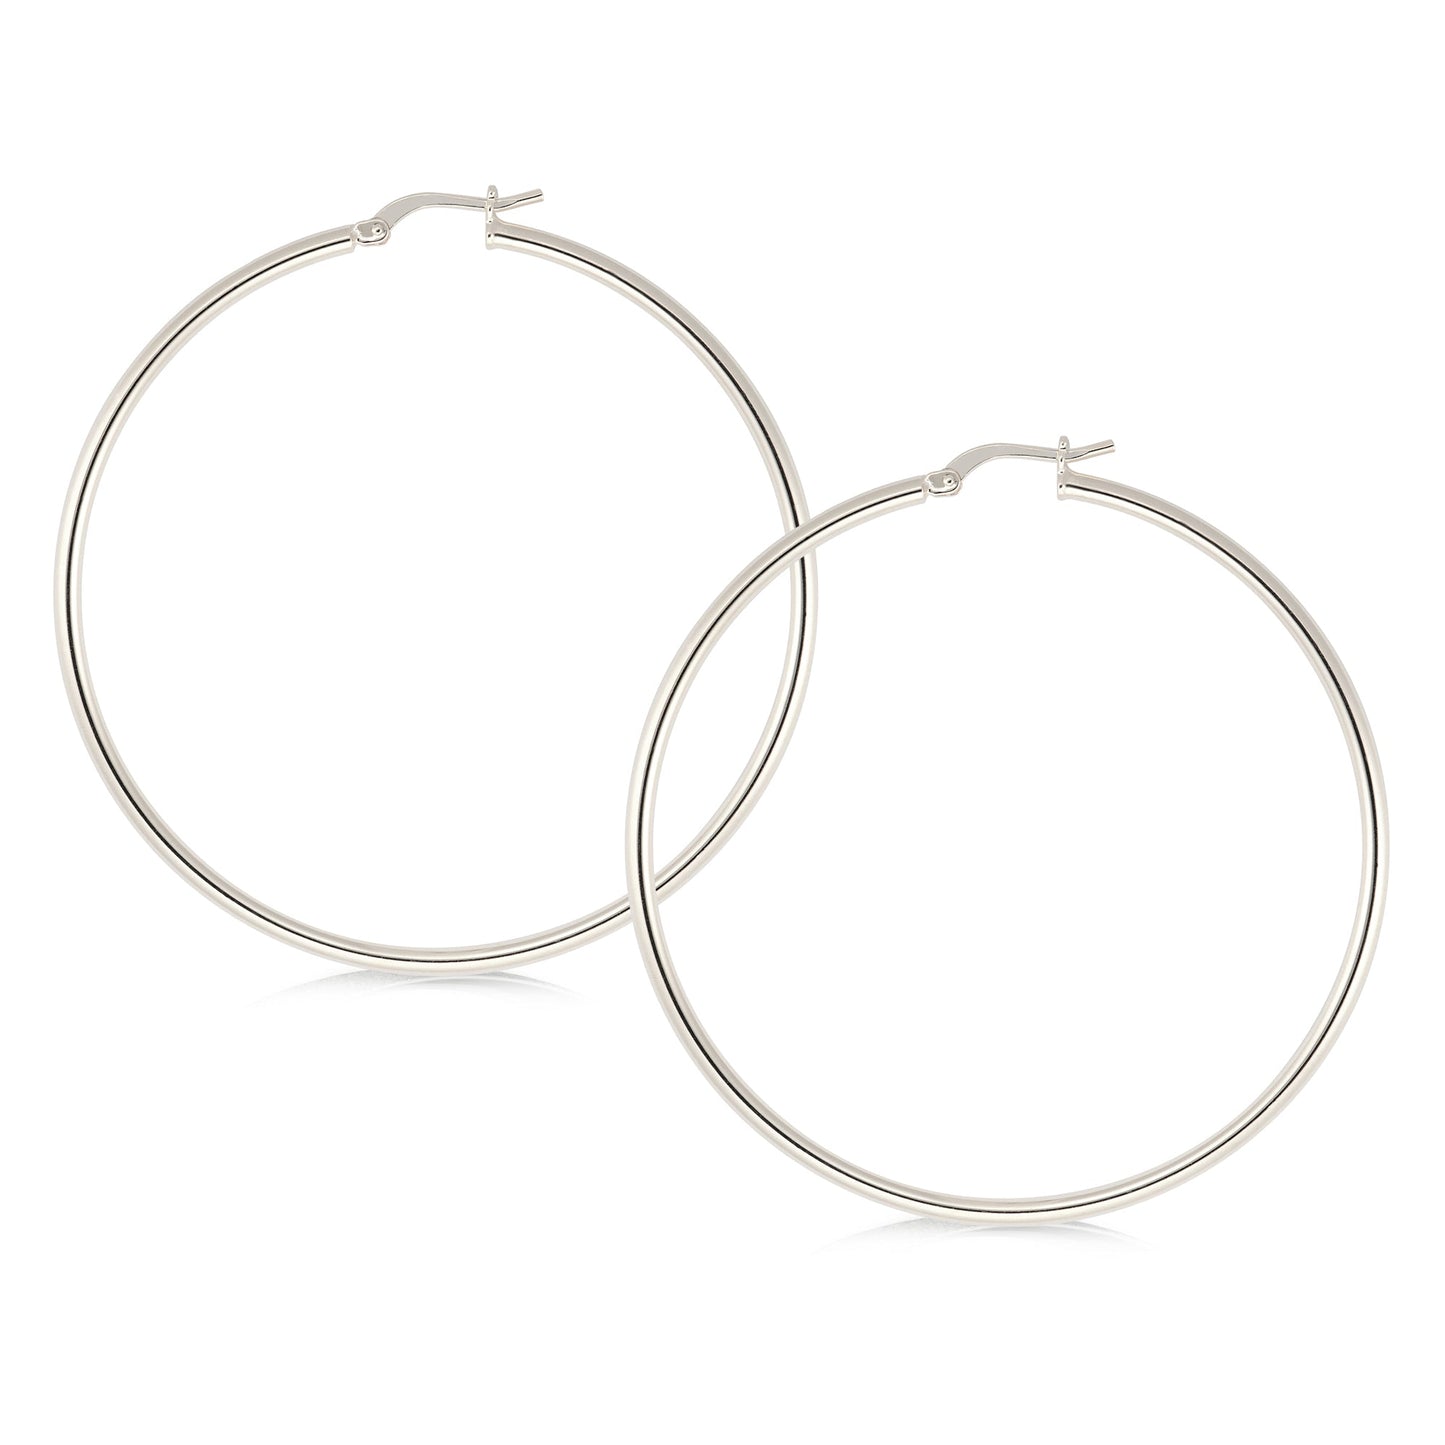 50mm silver Polished Hoops